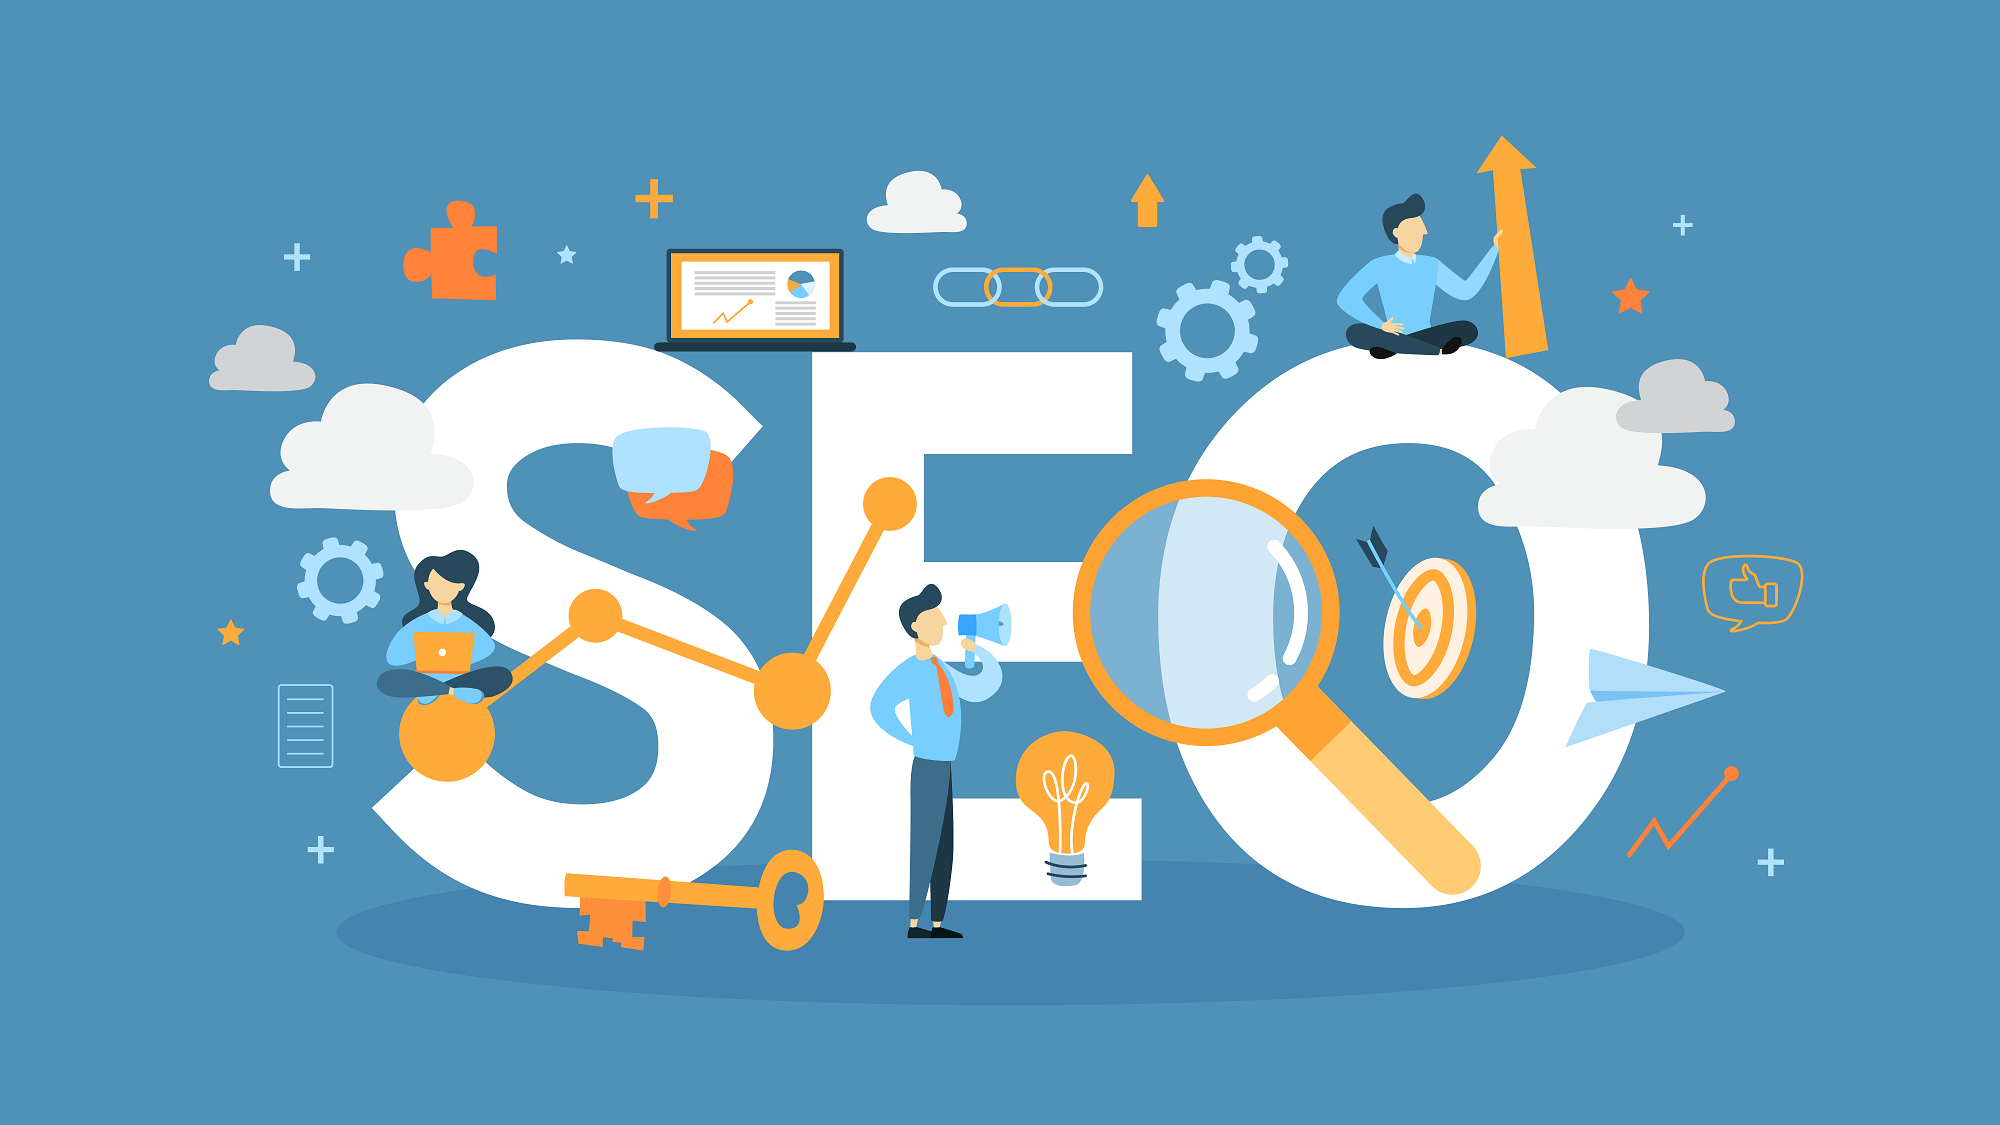 Real Estate SEO Services That Grow Your Business - Sure Oak